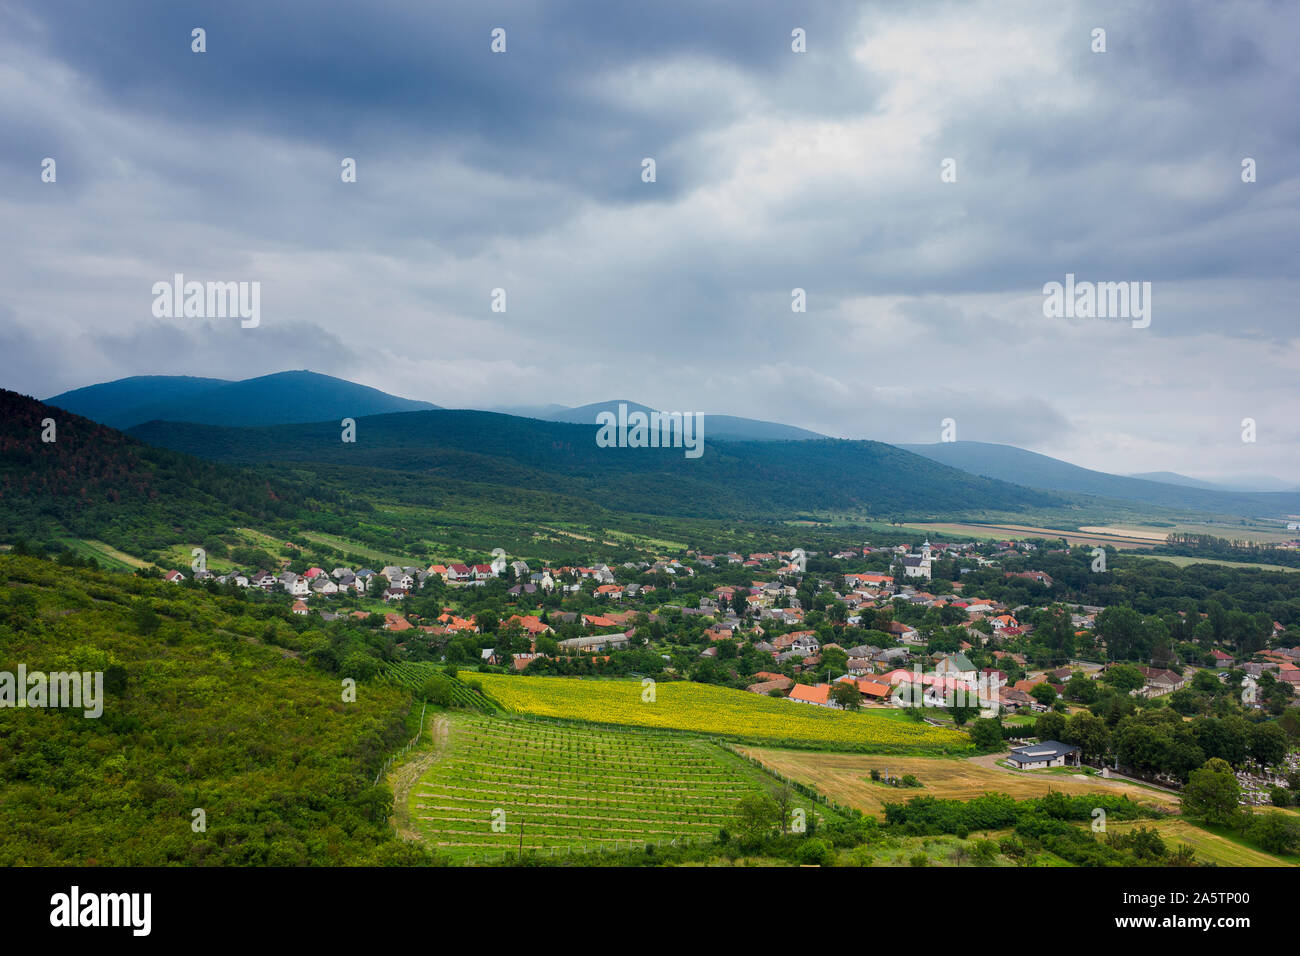 Small village in a valley. Hills, mountains and fields around. Summer day. Picture taken from the side of the hill. Stock Photo